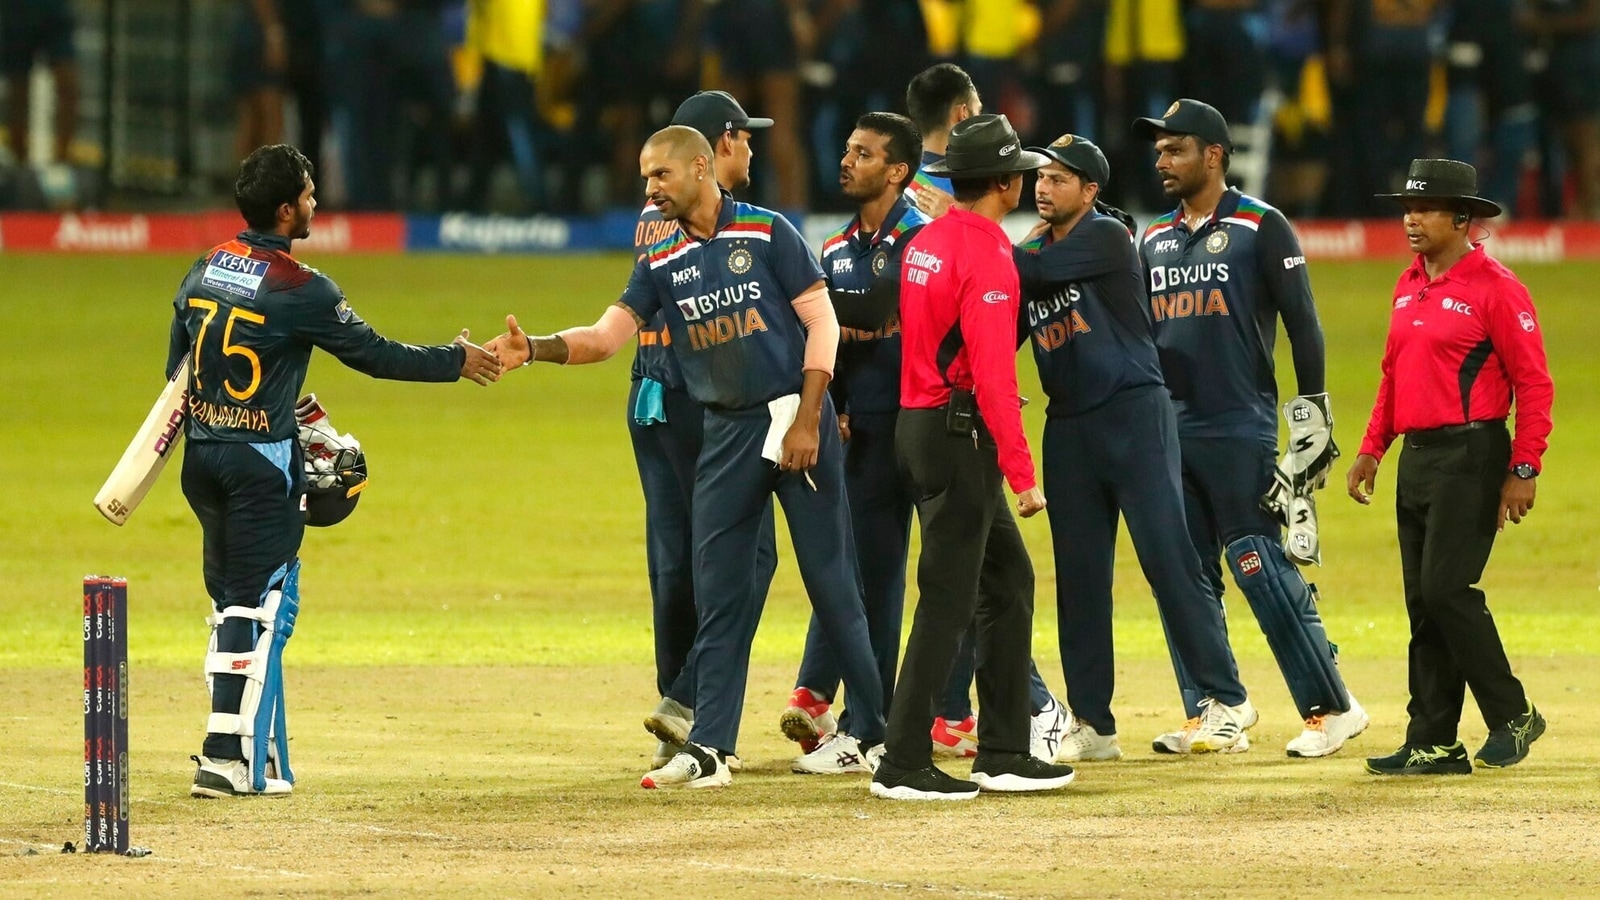 India vs Sri Lanka 3rd T20I Live Streaming When and where to watch Live IND vs SL Cricket match on TV and online Cricket